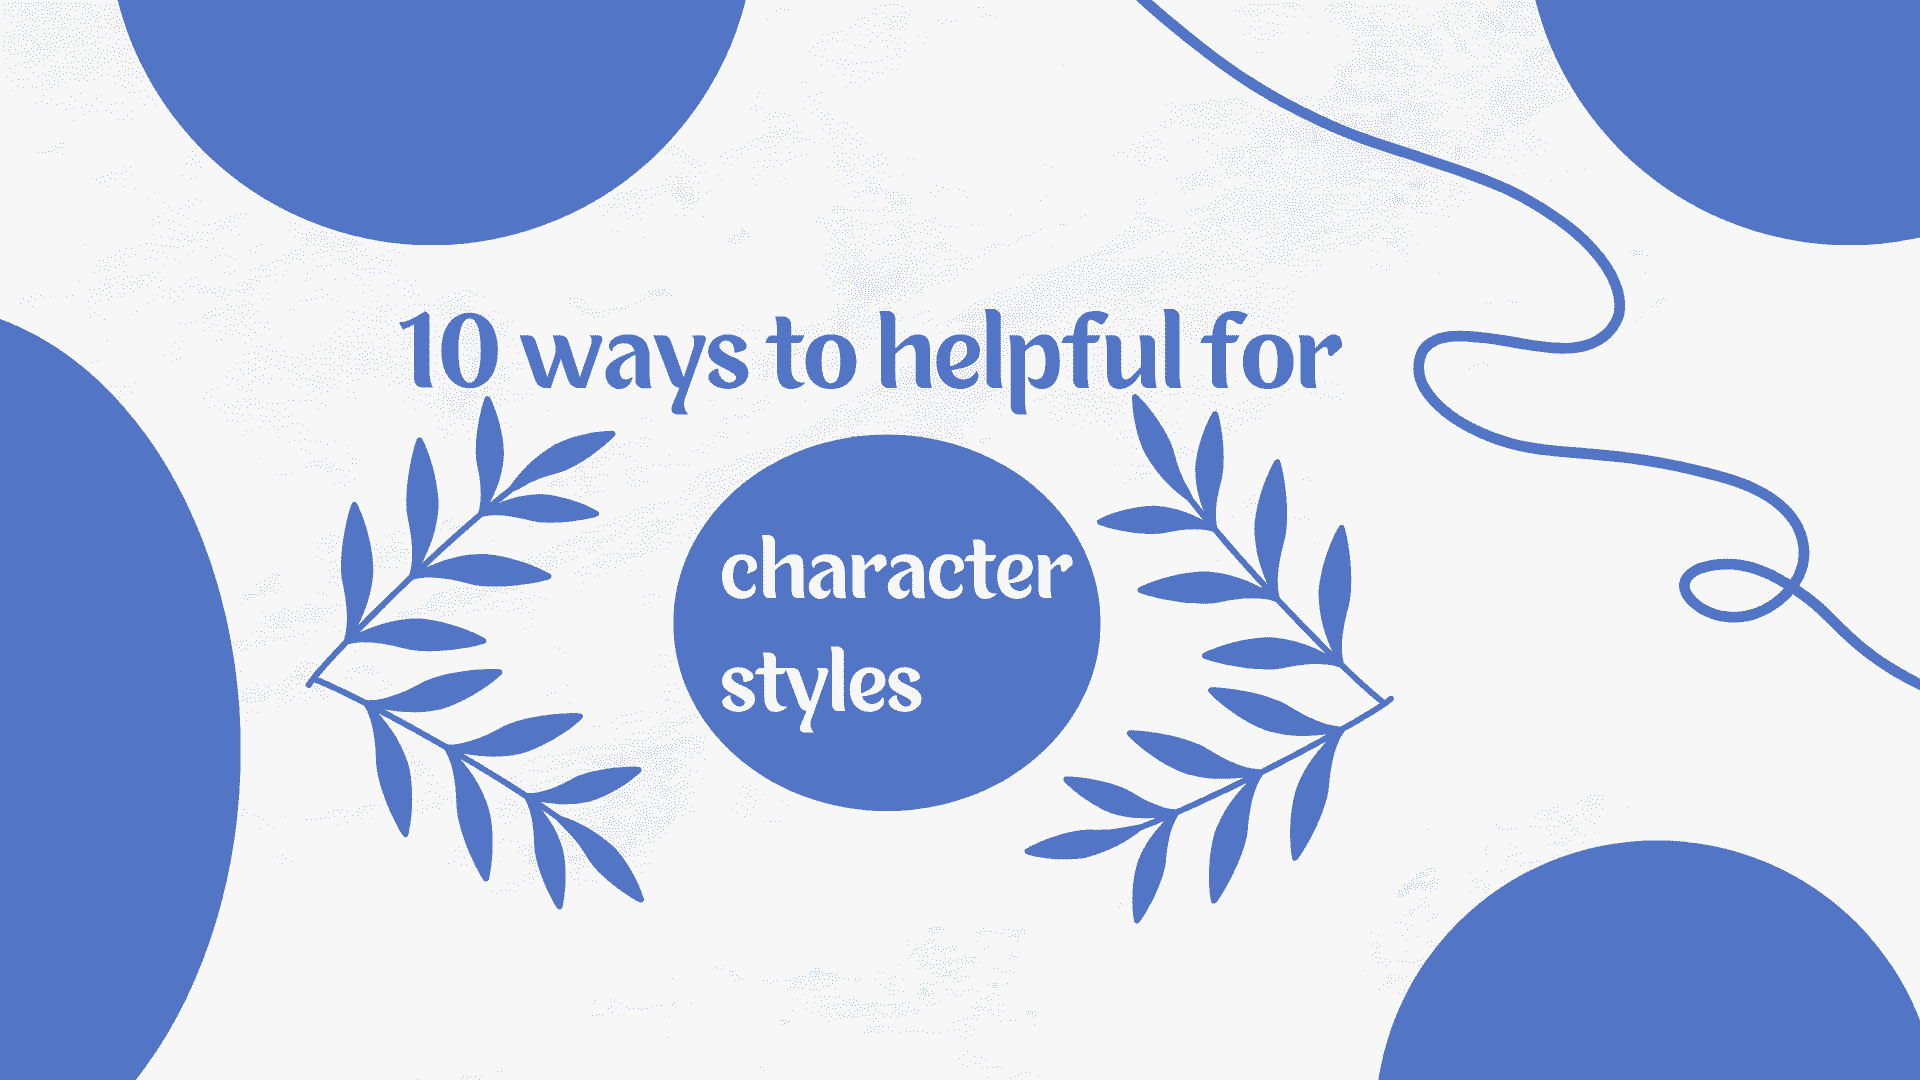 10-ways-to-helpful-for-character-styles-_2